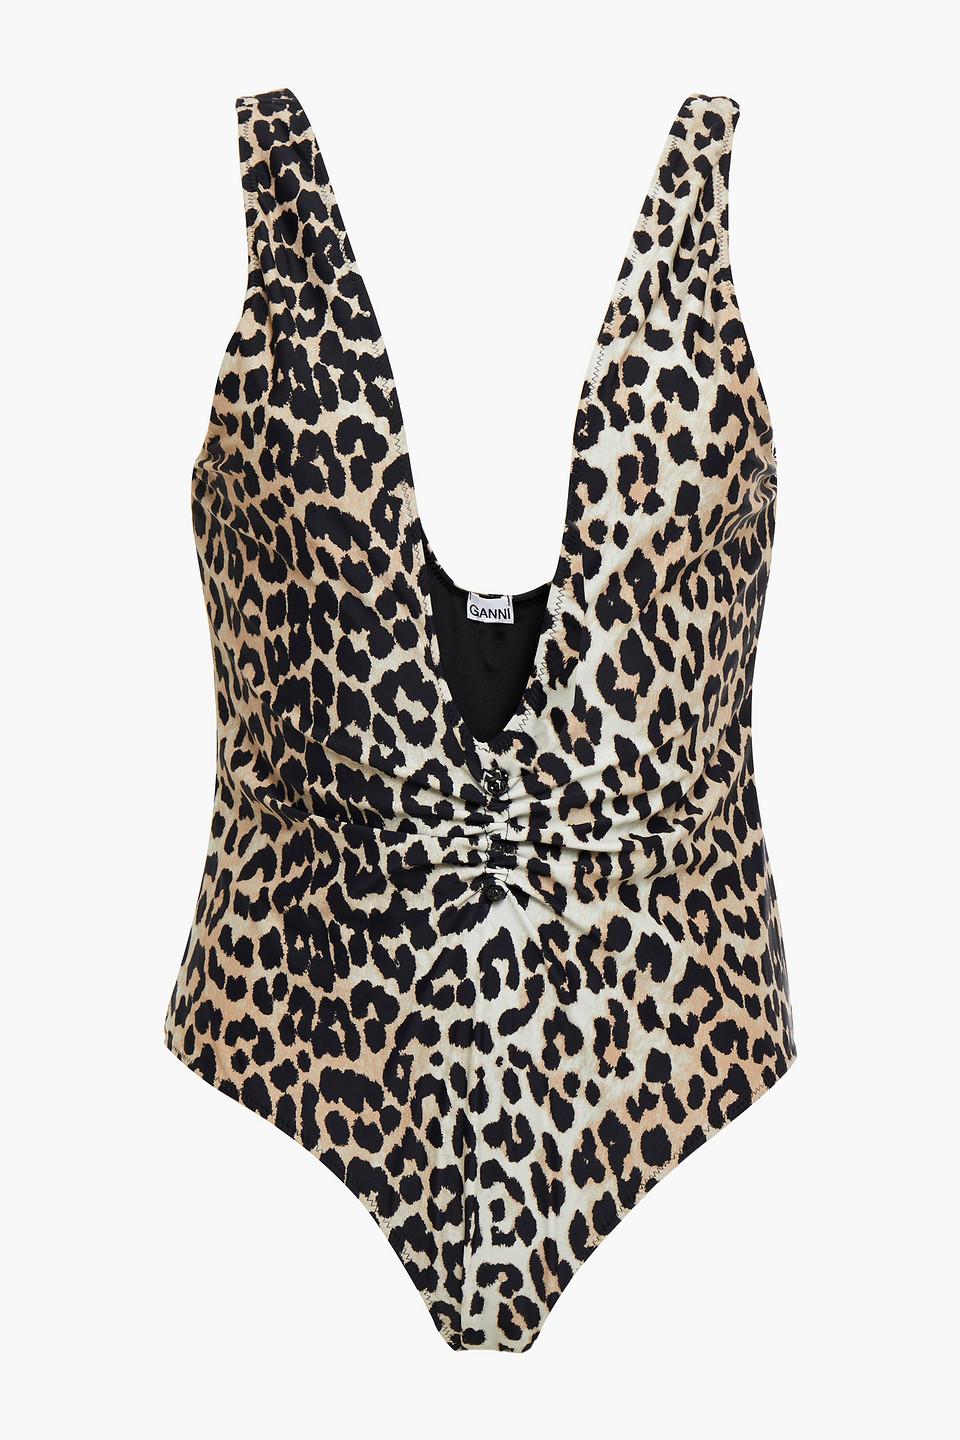 Ganni Synthetic Embellished Ruched Leopard-print Swimsuit in Animal Print  (Black) | Lyst